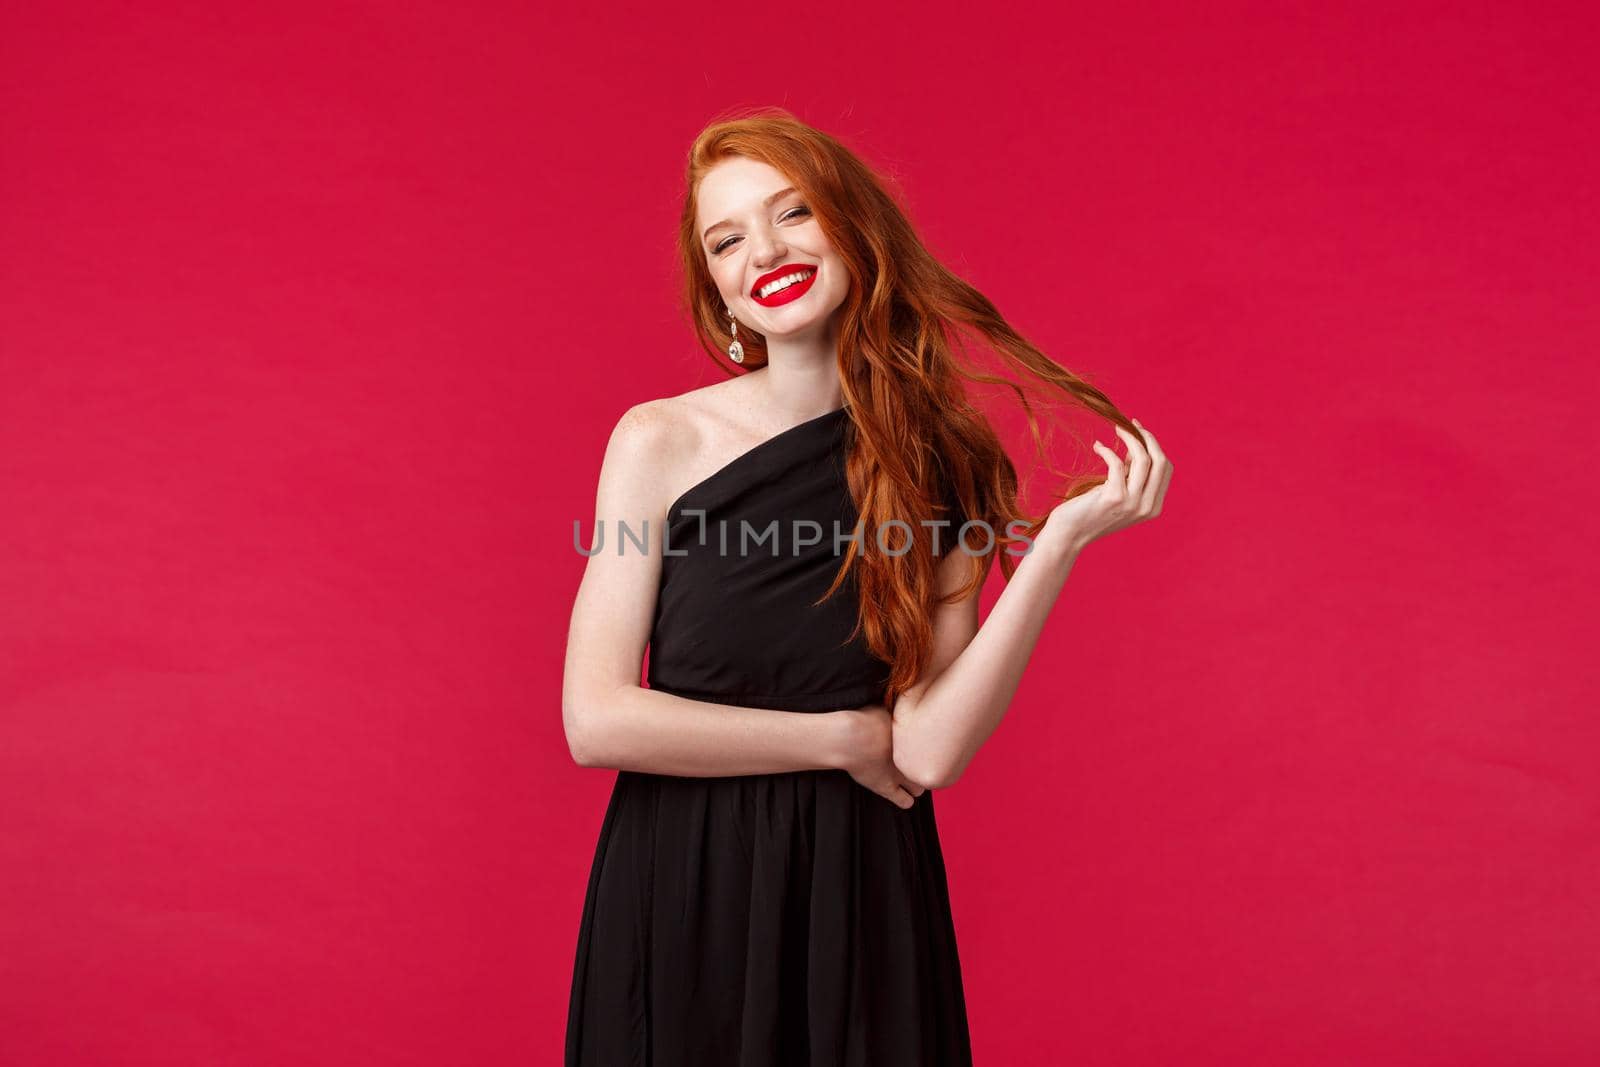 Elegance, fashion and woman concept. Gorgeous good-looking redhead young woman in black elegant dress, coquettish smiling with pleased emotion, rolling hair strand flirty, red background.